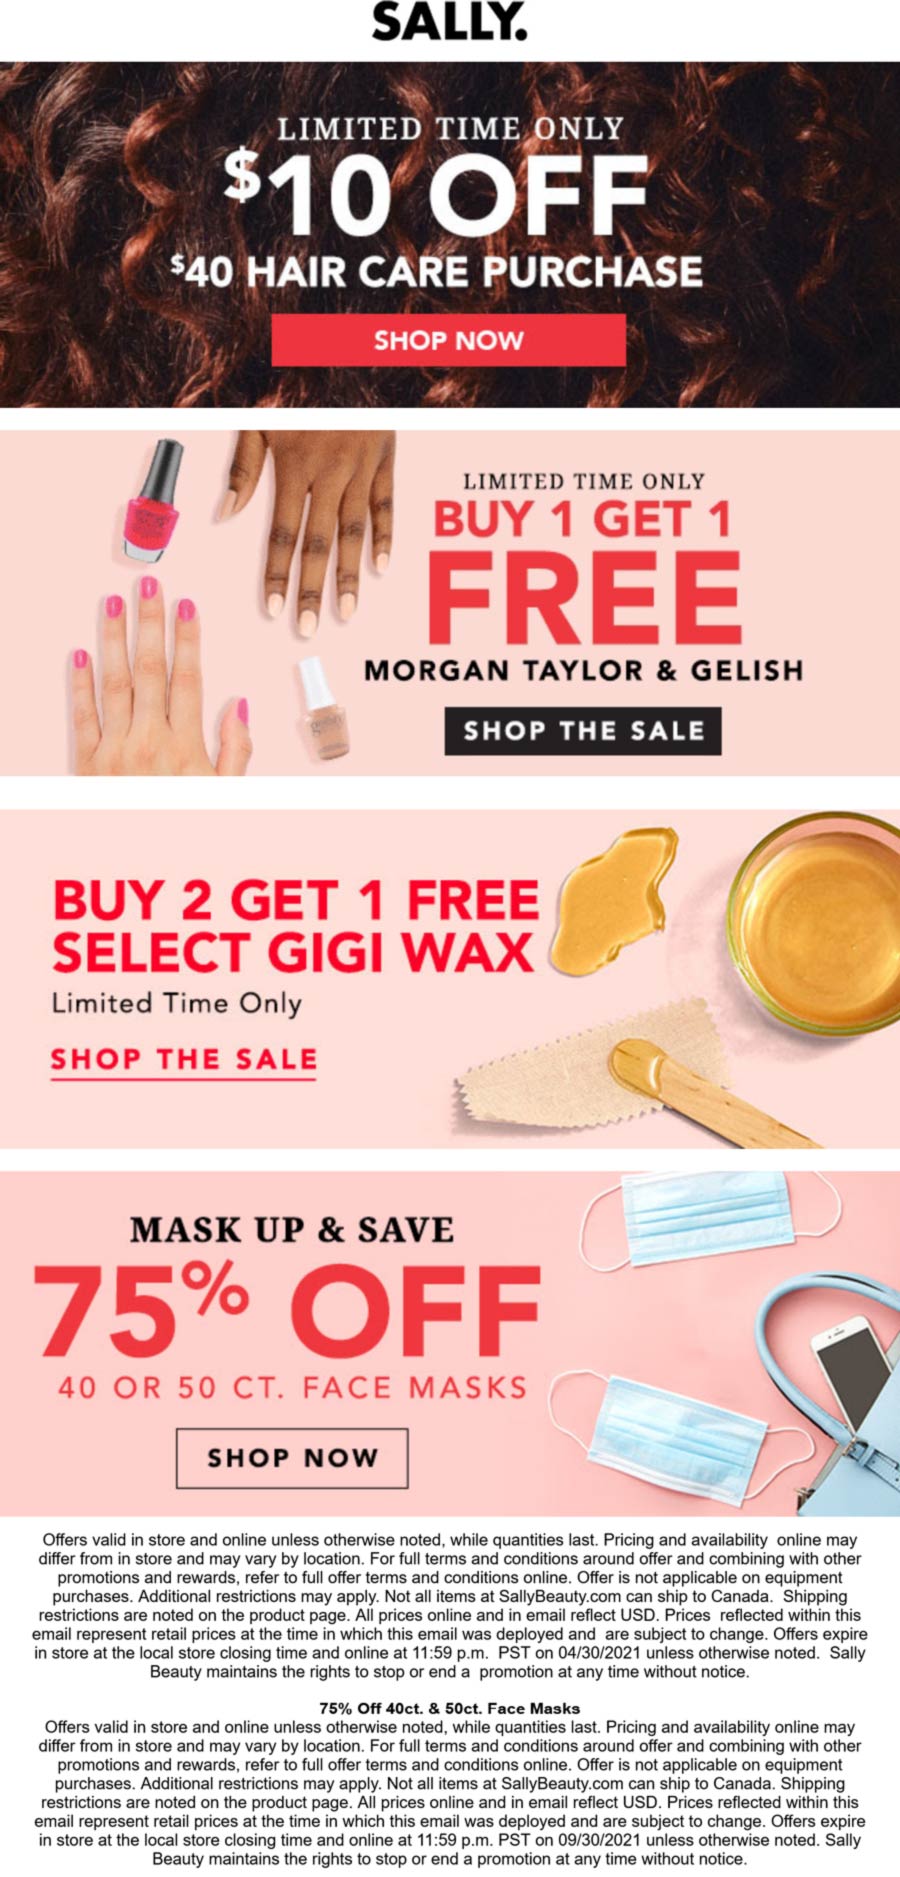 Sally Beauty stores Coupon  $10 off $40 on haircare at Sally Beauty, ditto online #sallybeauty 